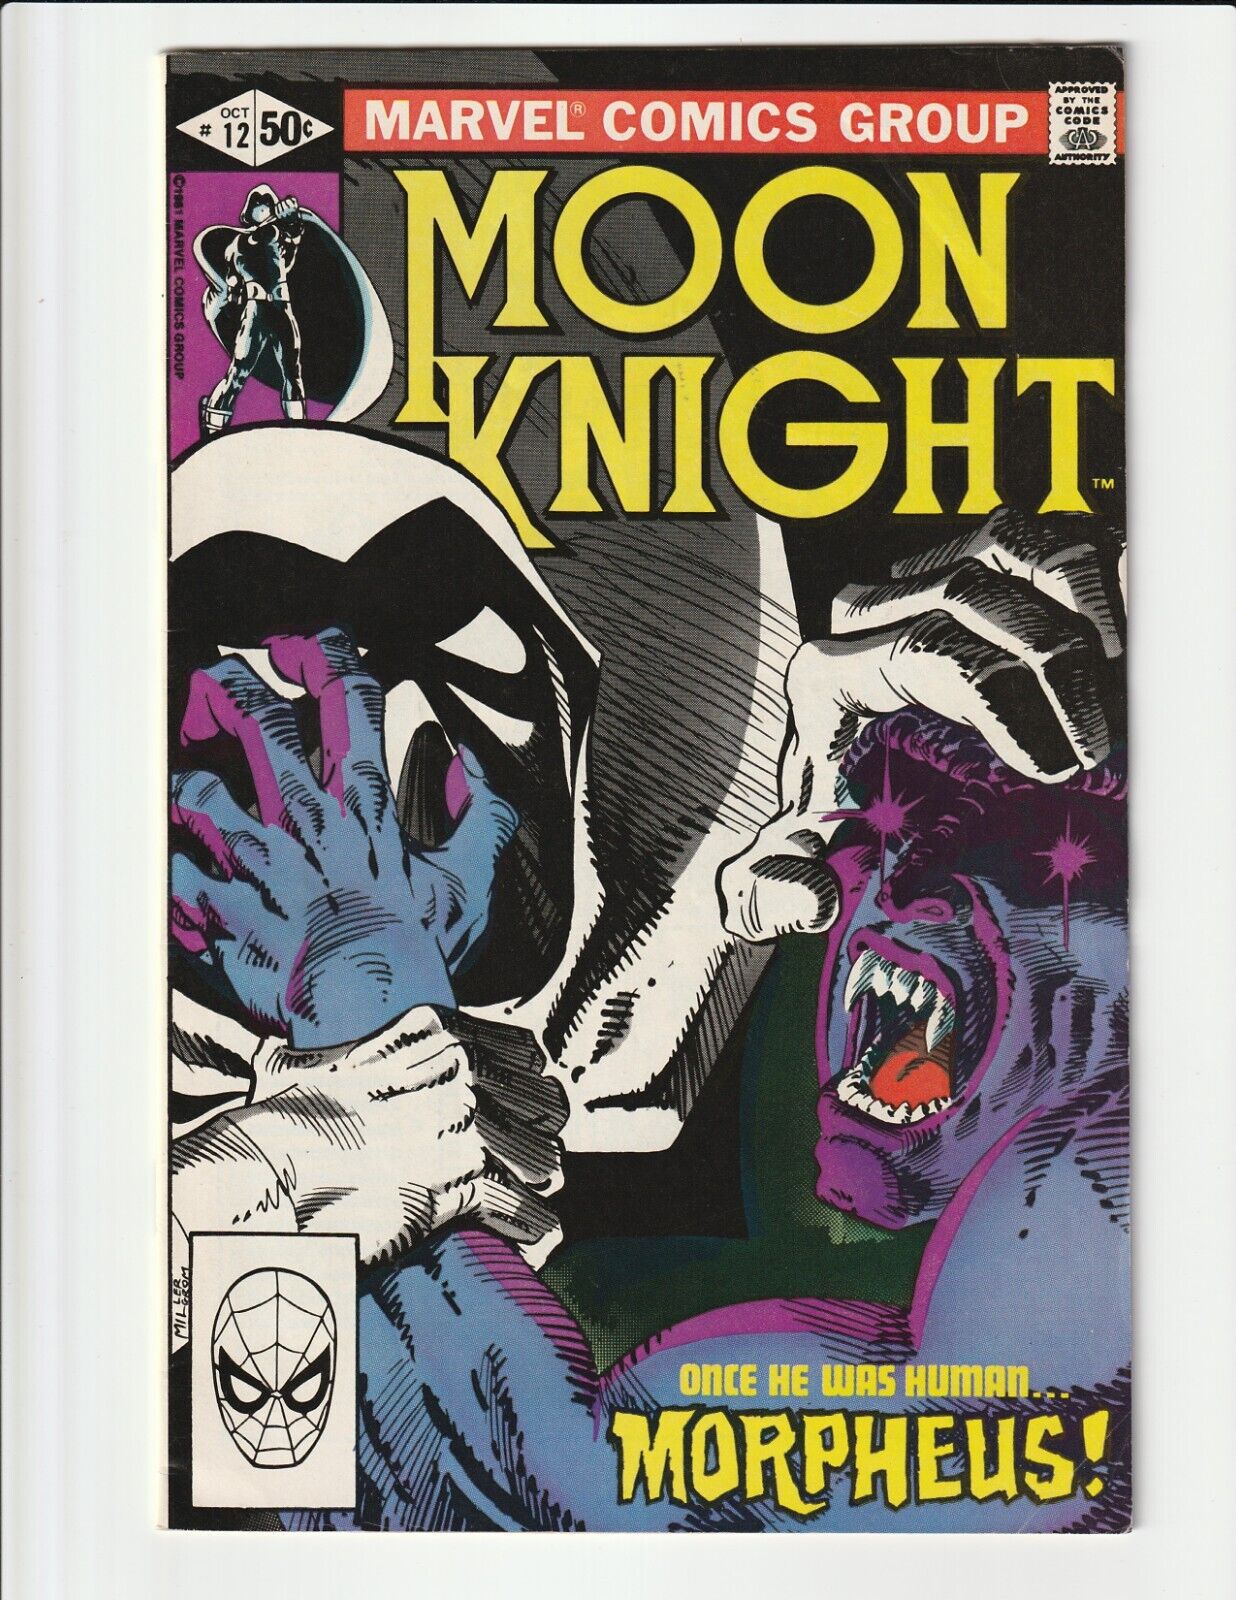 MOON KNIGHT #12 (1981) HIGHER GRADE FIRST APPEARANCE OF MORPHEUS MARVEL COMICS